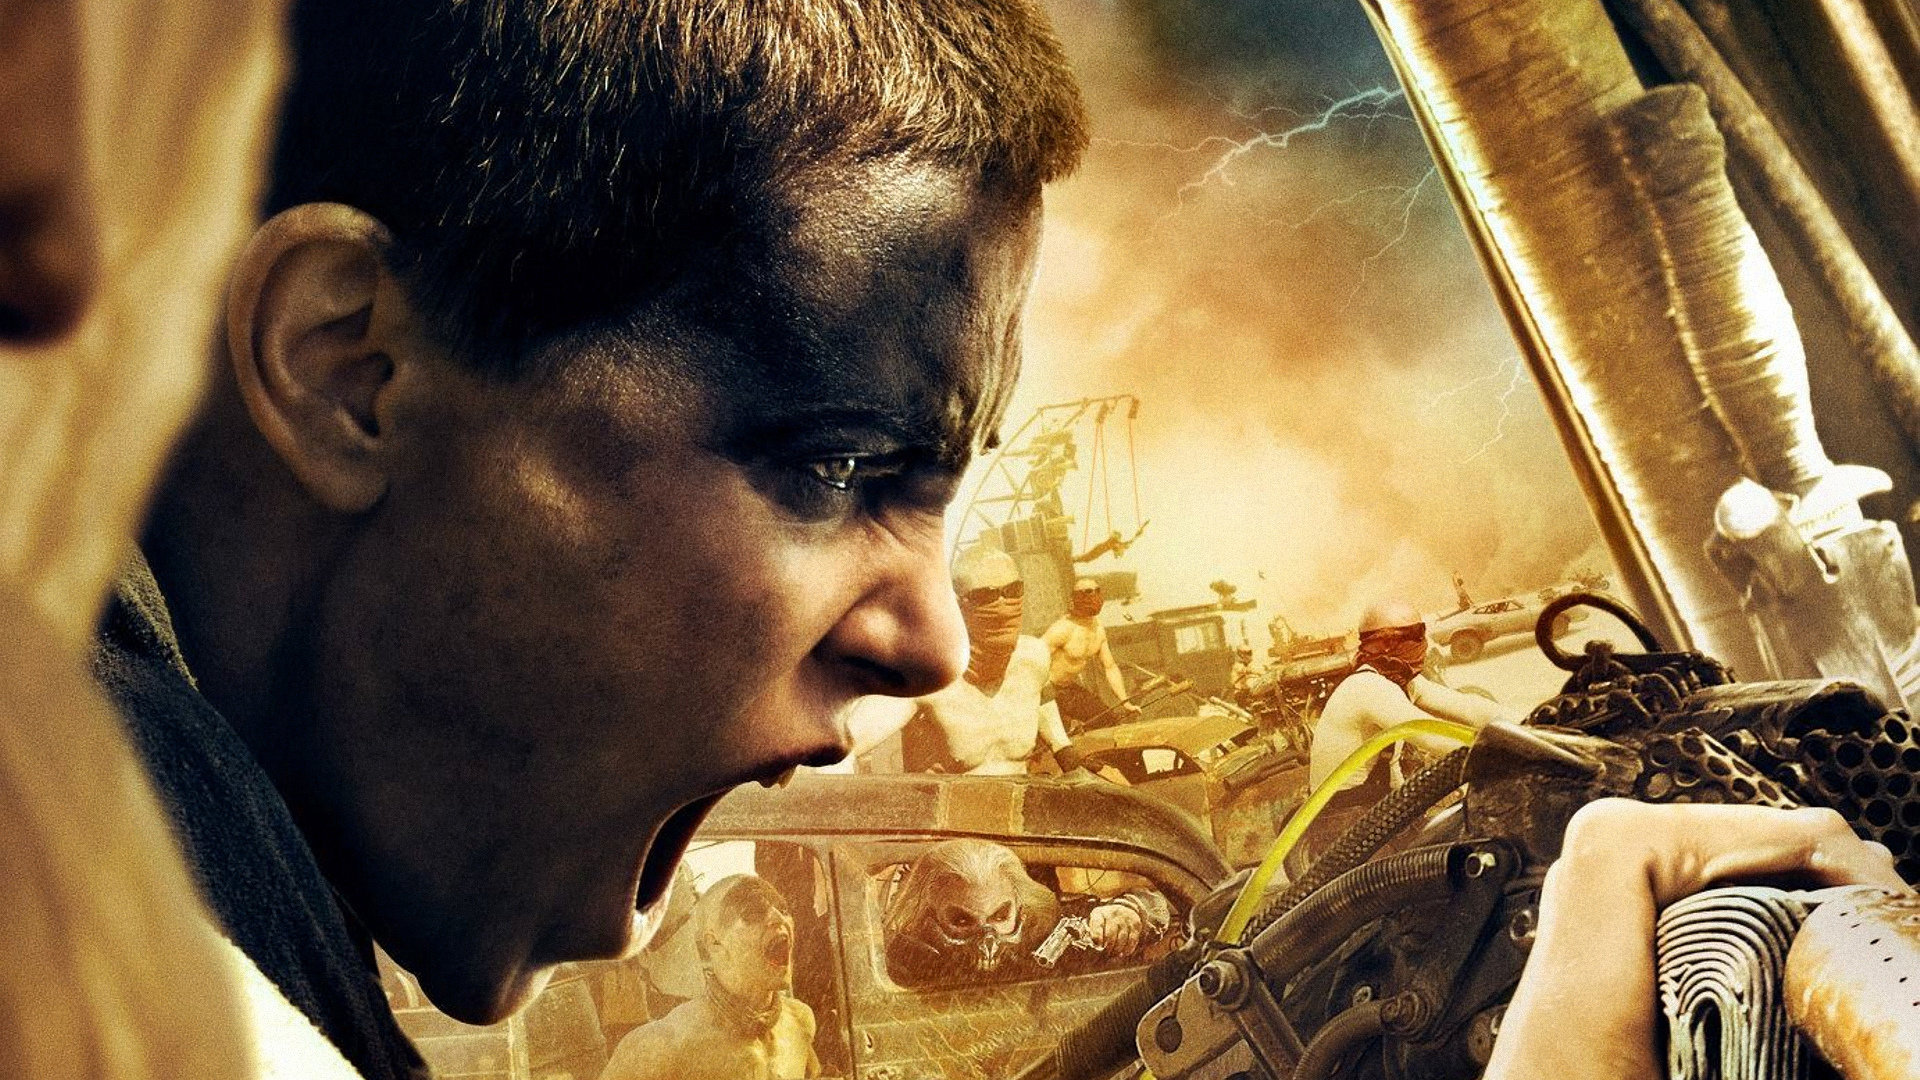 Awesome Mad Max: Fury Road free wallpaper ID:137480 for hd 1920x1080 desktop